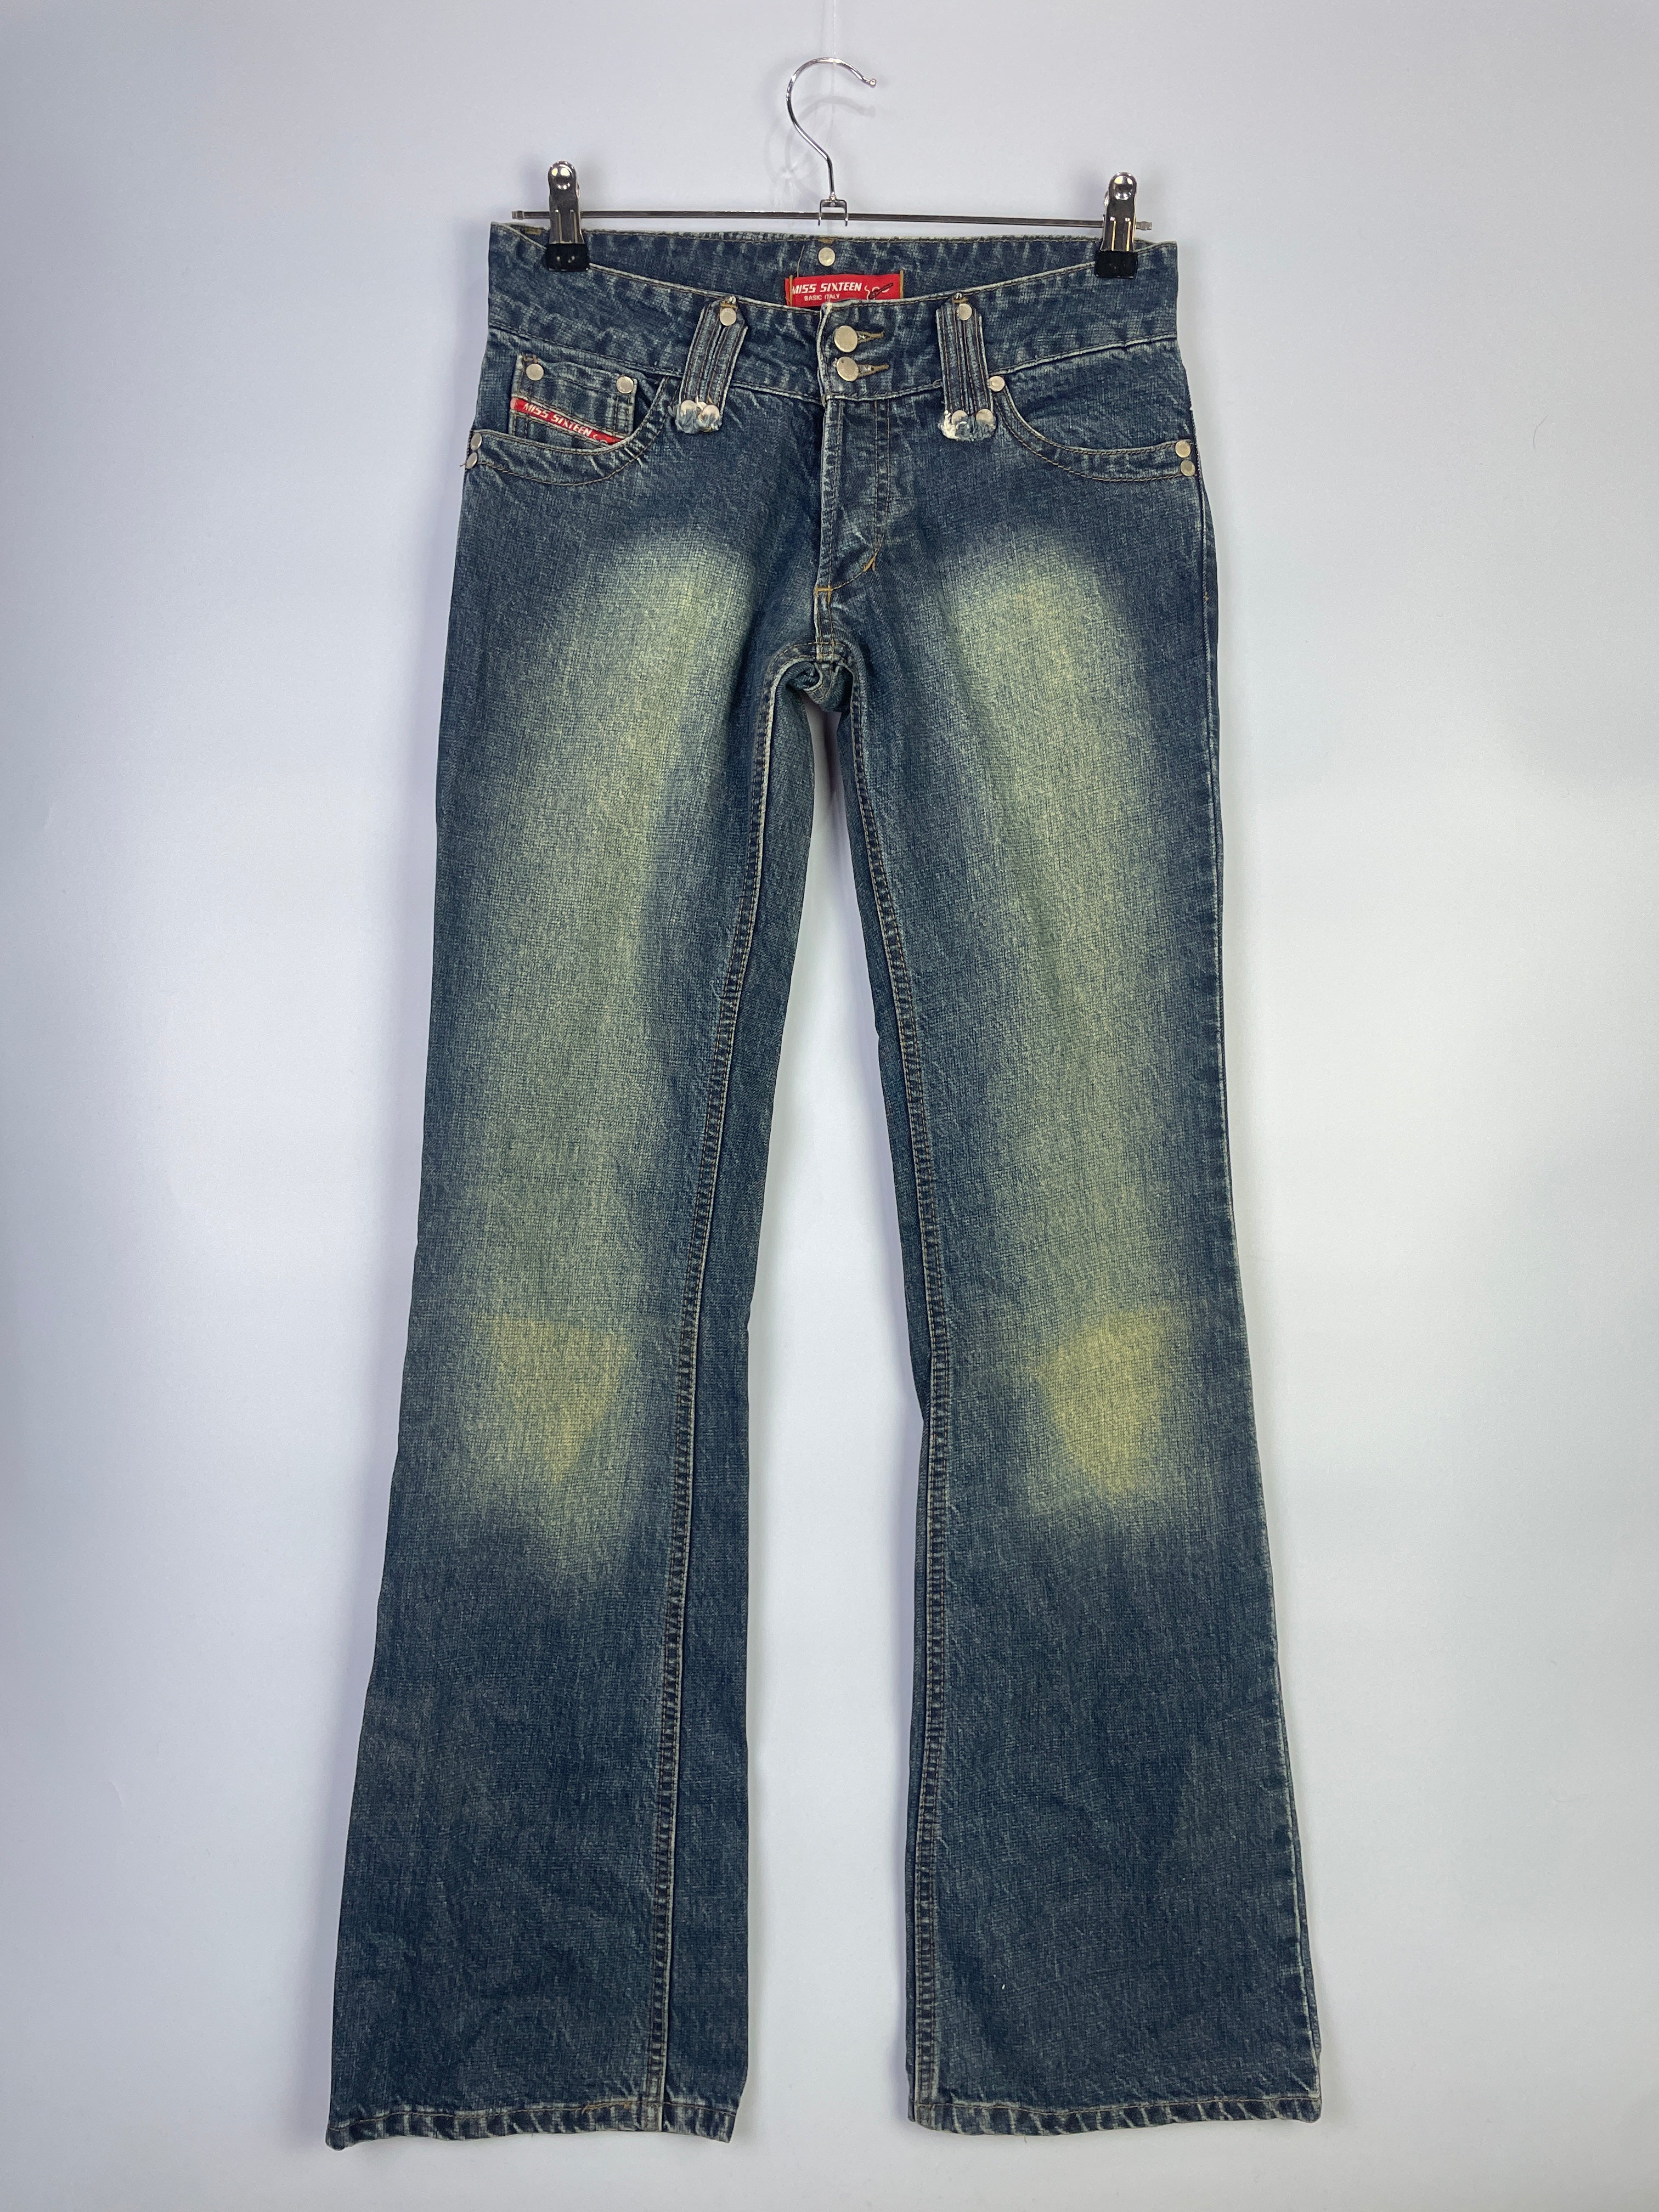 M Miss Sixteen Vintage Flared Jeans